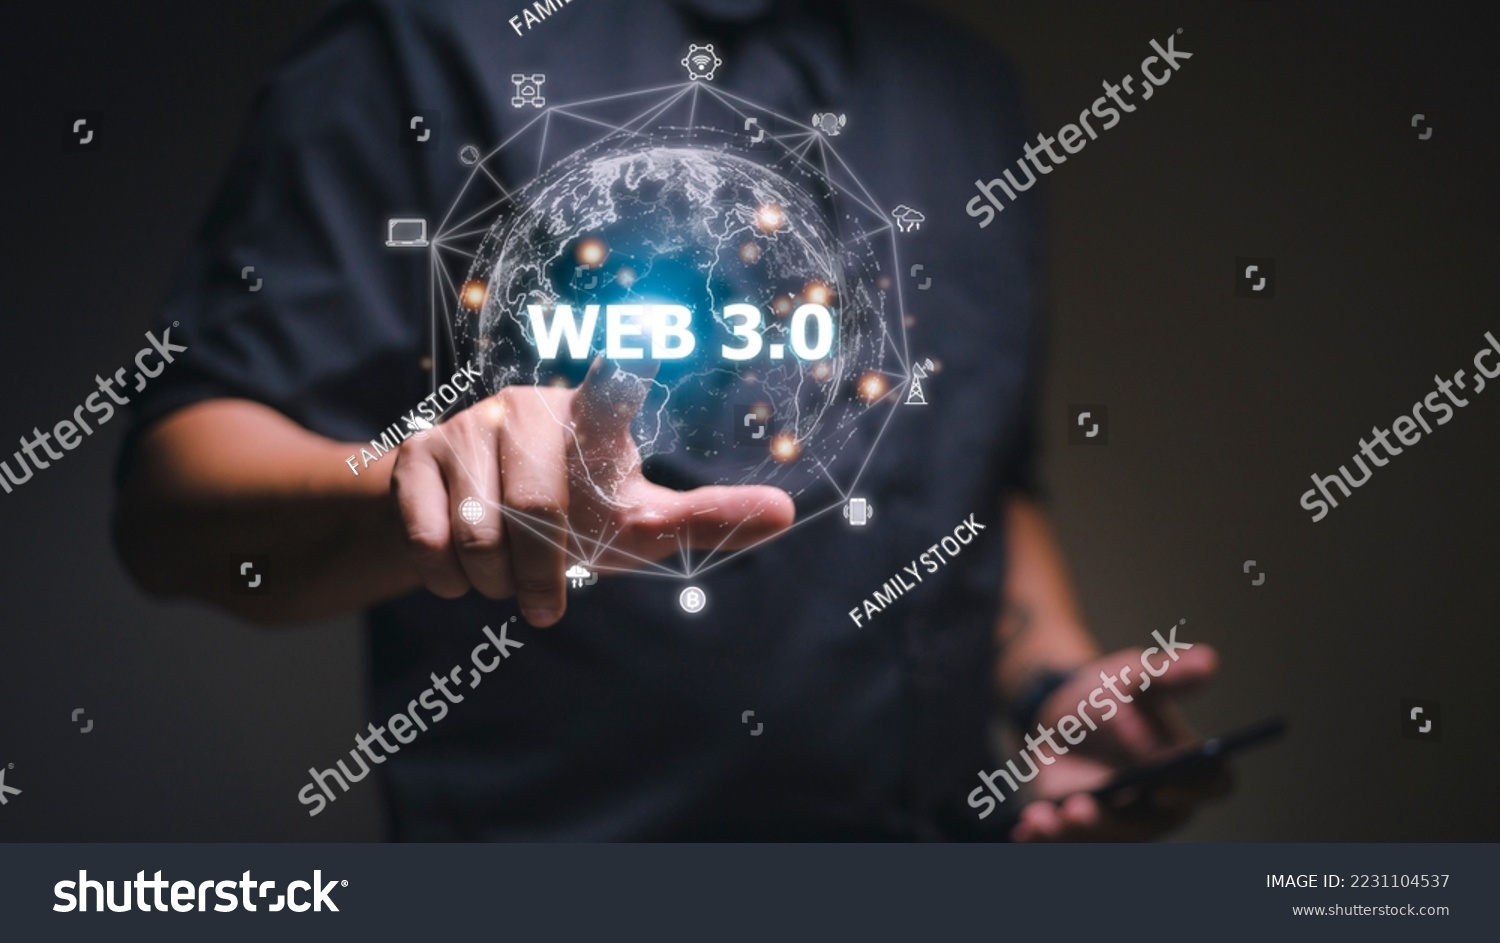 Web 3.0 concept image with a man using a laptop. Technology and WEB 3.0 concept. #2231104537